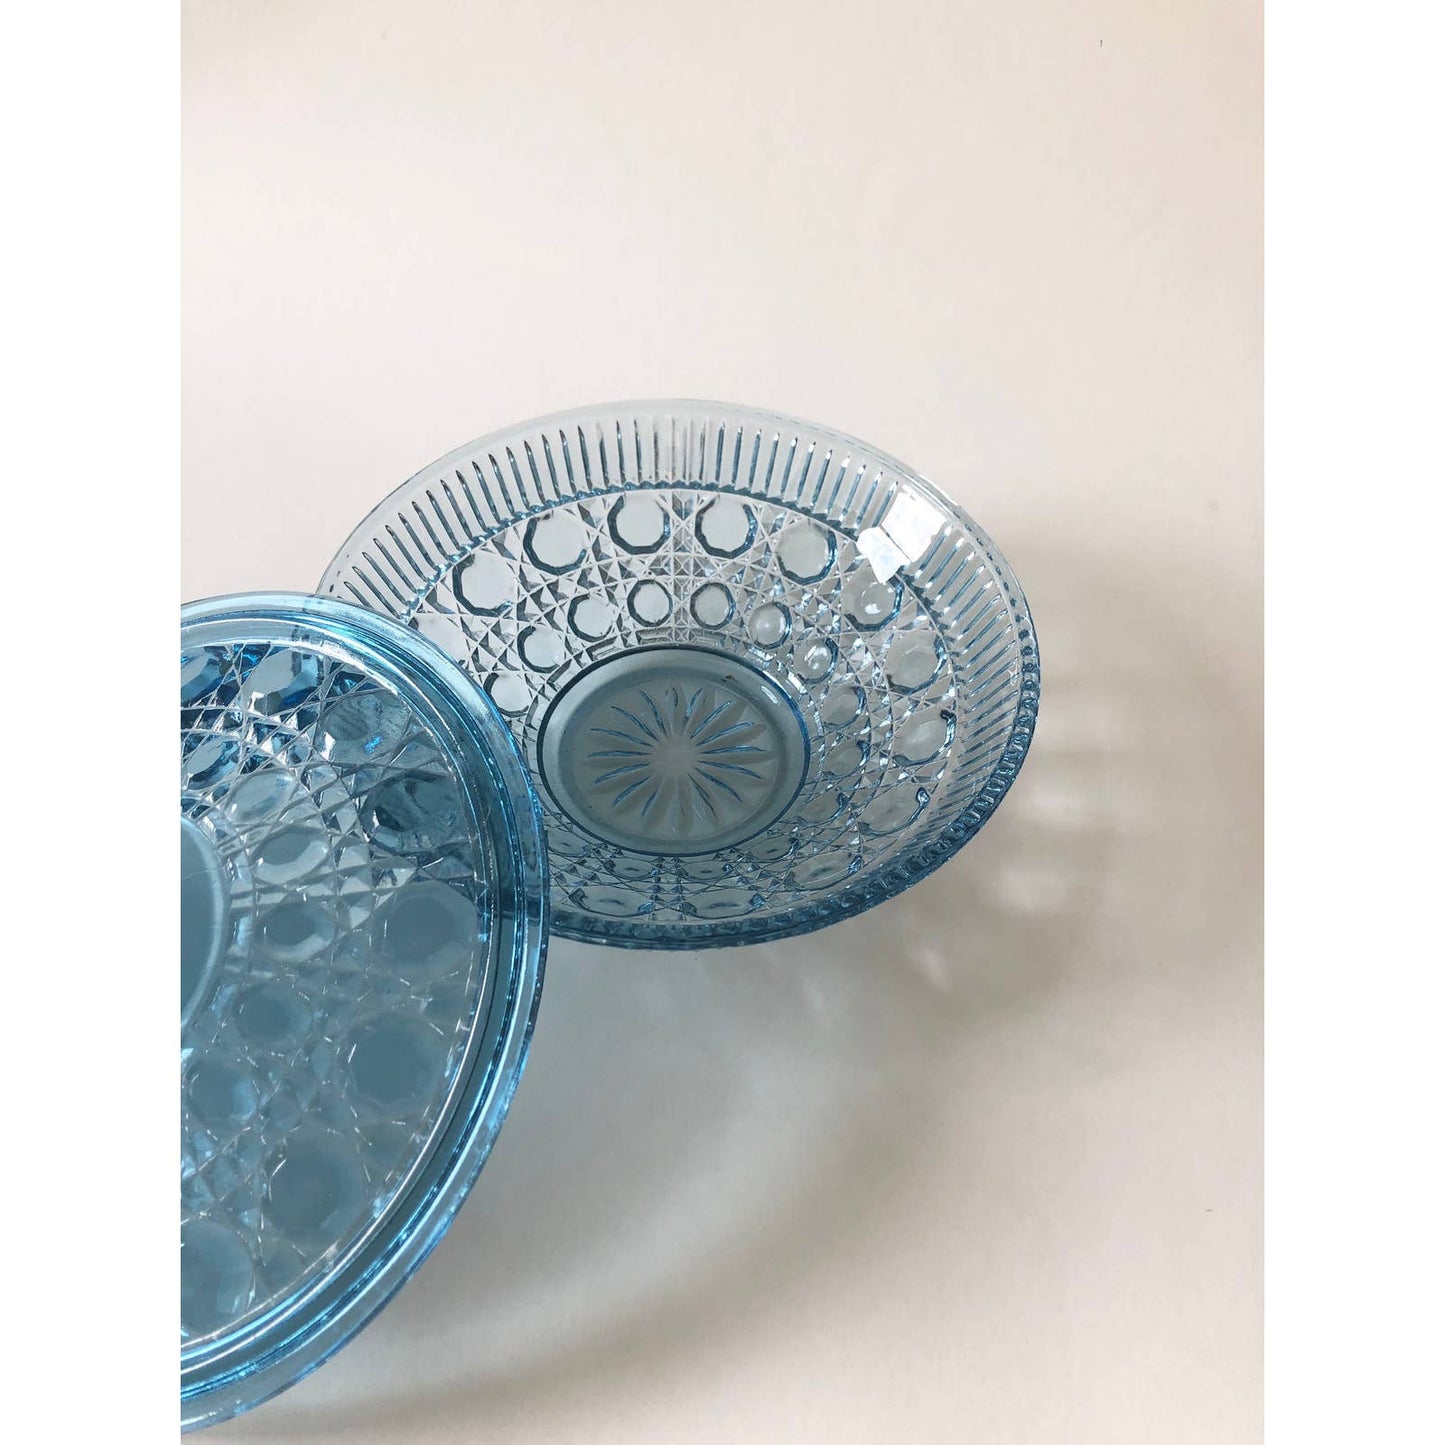 Vintage Light Blue Pressed Glass Catchall Bowl with Lid